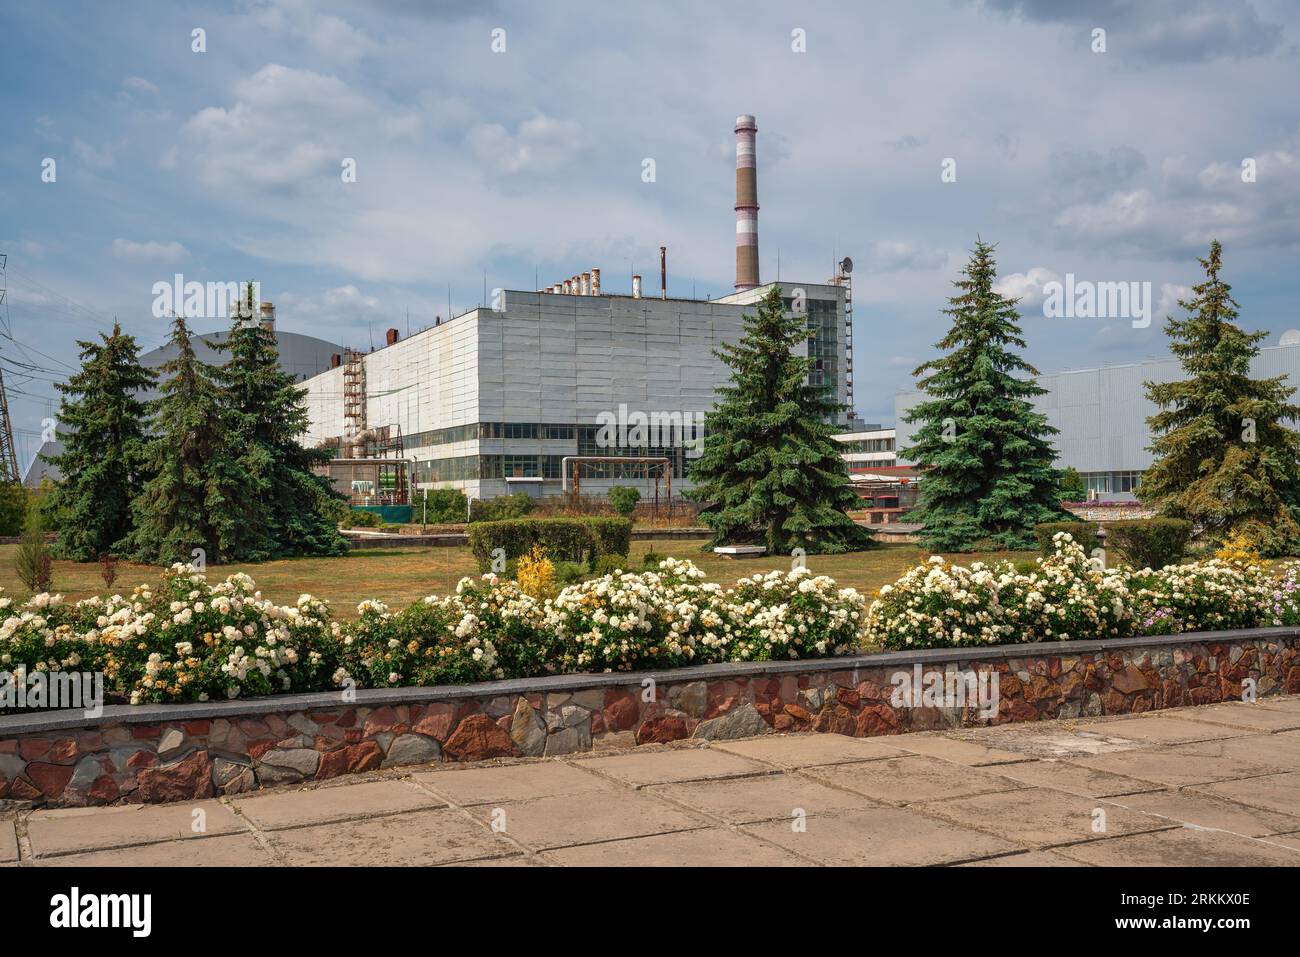 Nuclear Reactors of Chernobyl Nuclear Power Plant - Chernobyl Exclusion Zone, Ukraine Stock Photo